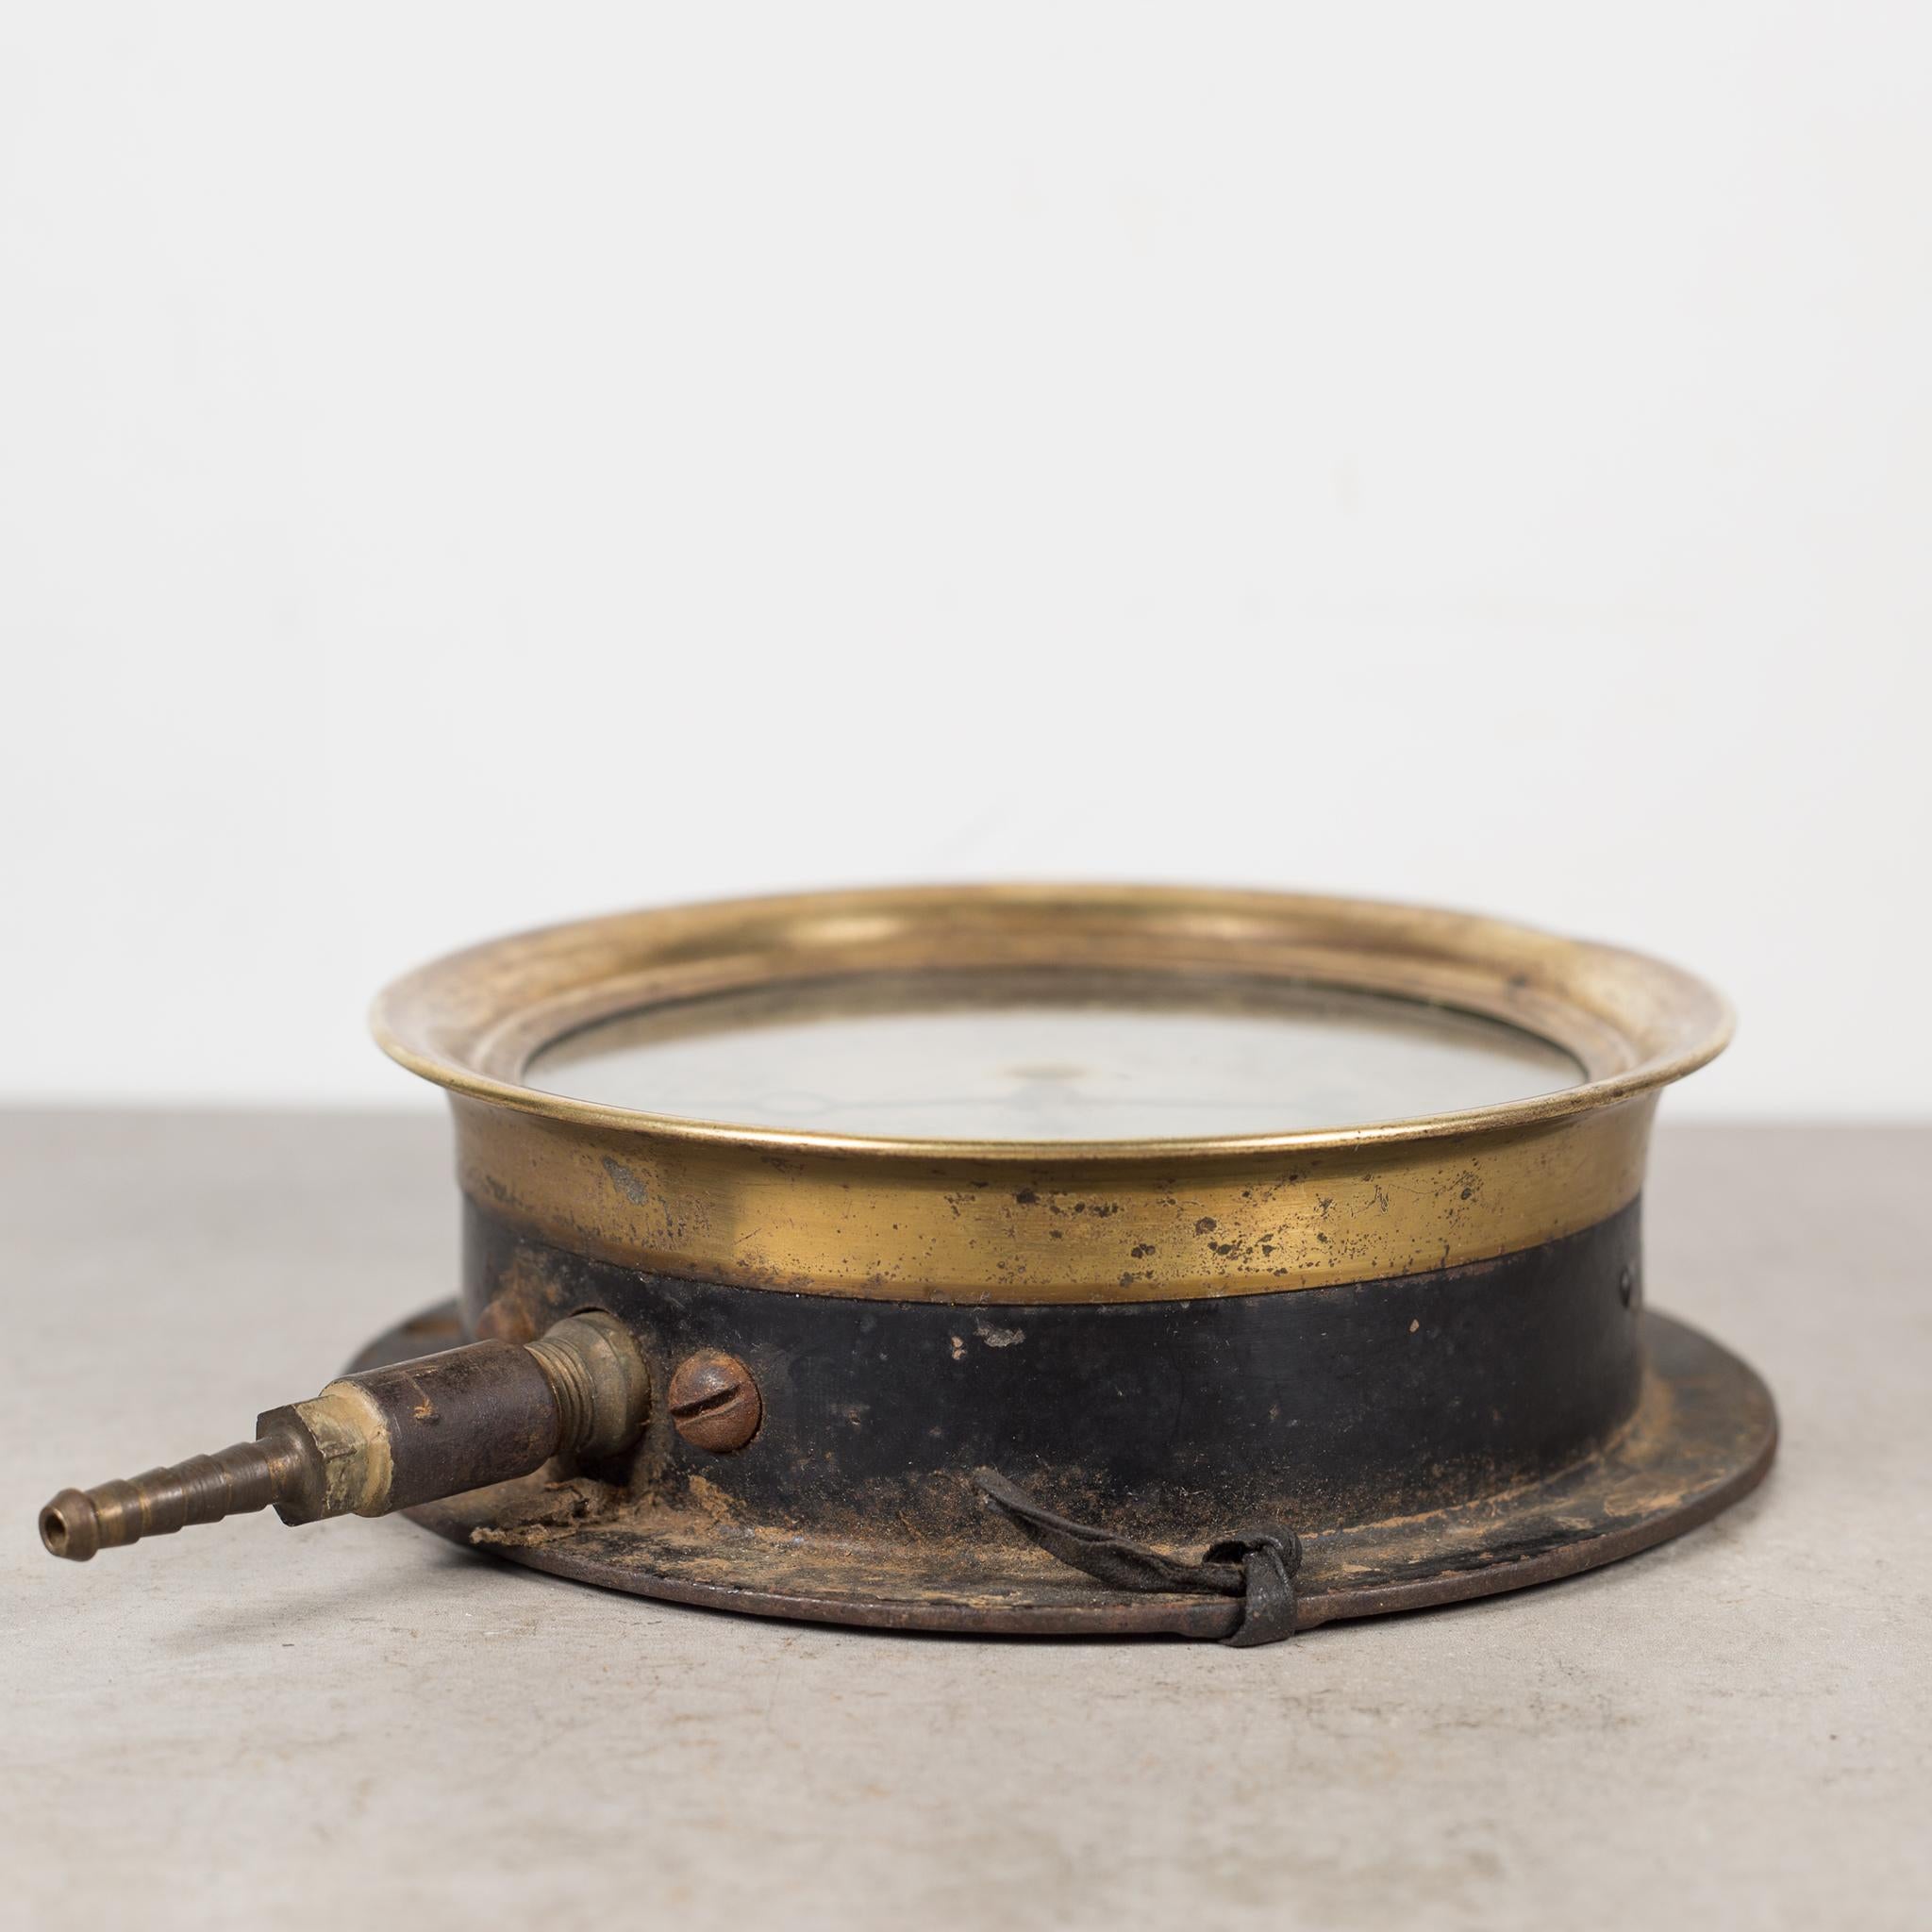 About

An antique brass ship or locomotive pressure gauge with glass front and steel base. This piece has retained its original finish with minor blemishes on the glass. The glass is not cracked or chipped.

 Creator: Ashcroft, New York.
 Date